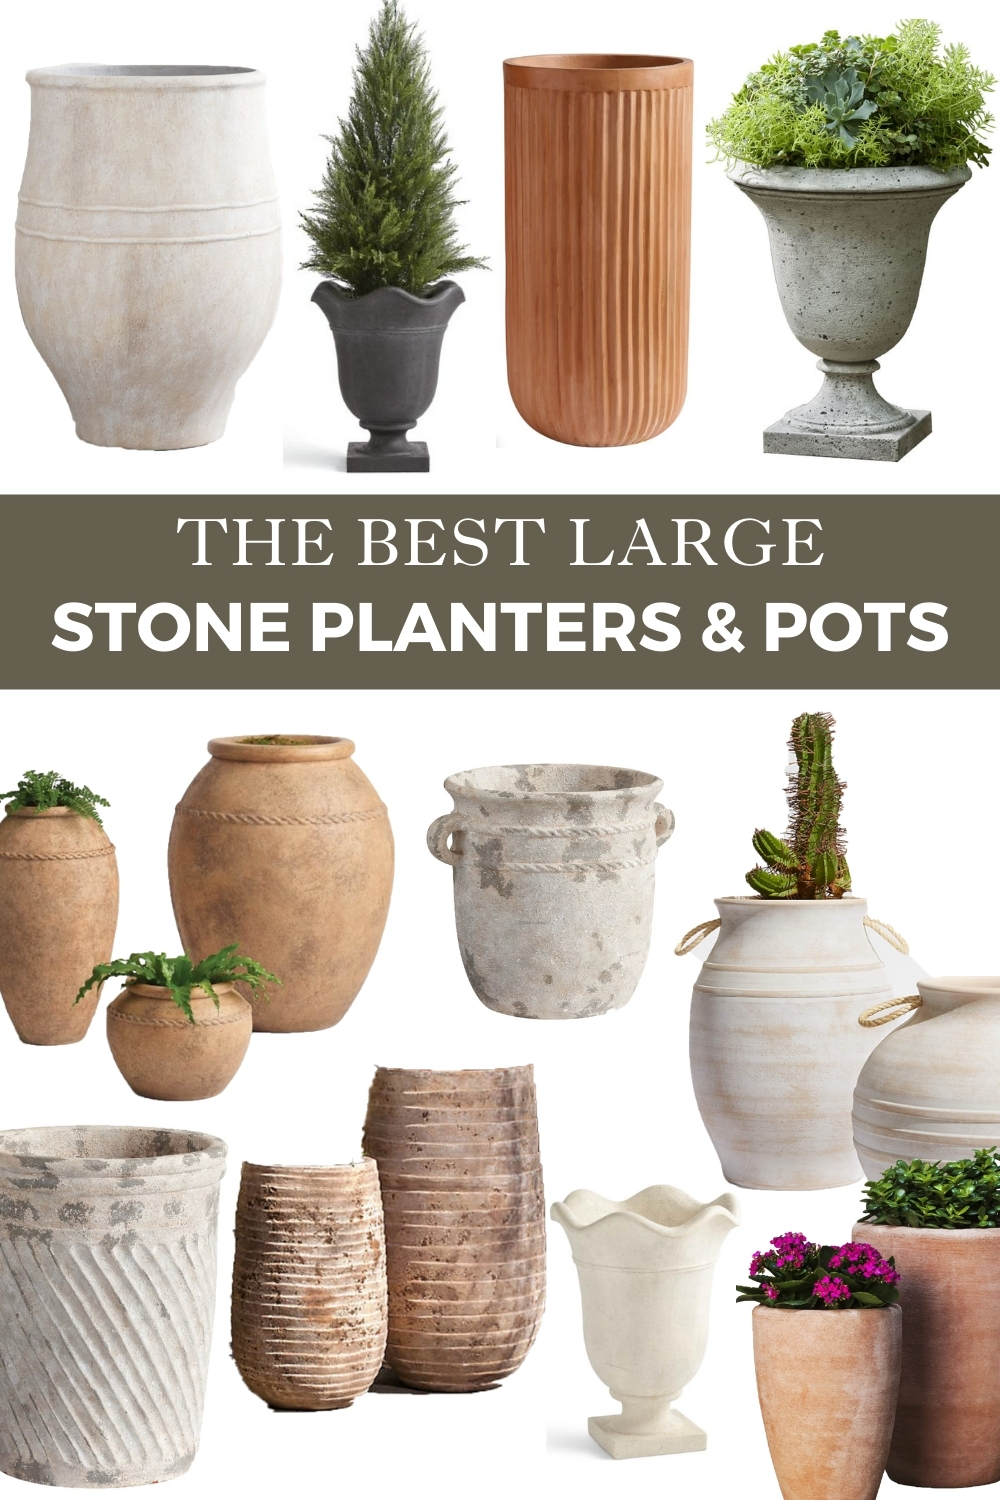 The Best Large Stone Planters and Pots